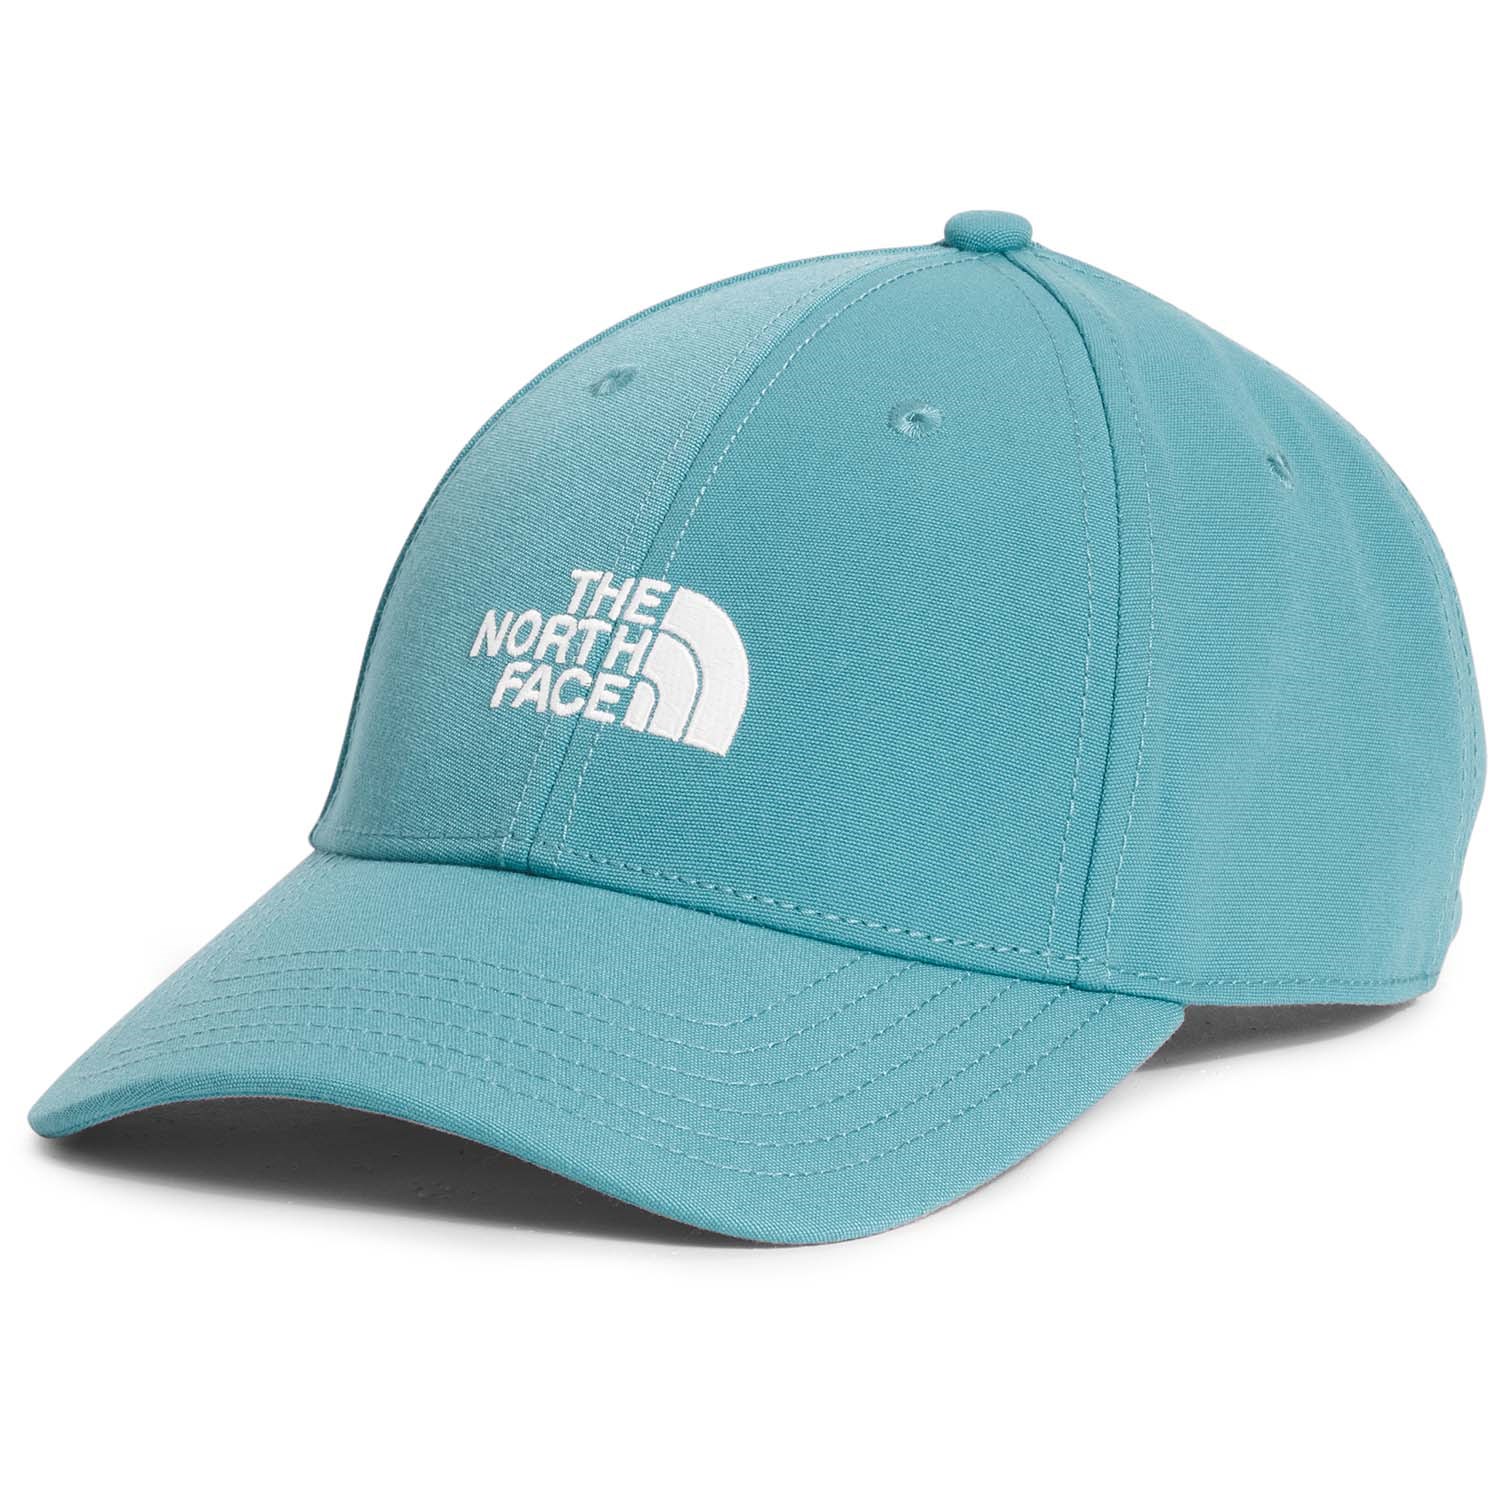 Кепка The North Face Recycled 66 Classic, цвет Reef Waters